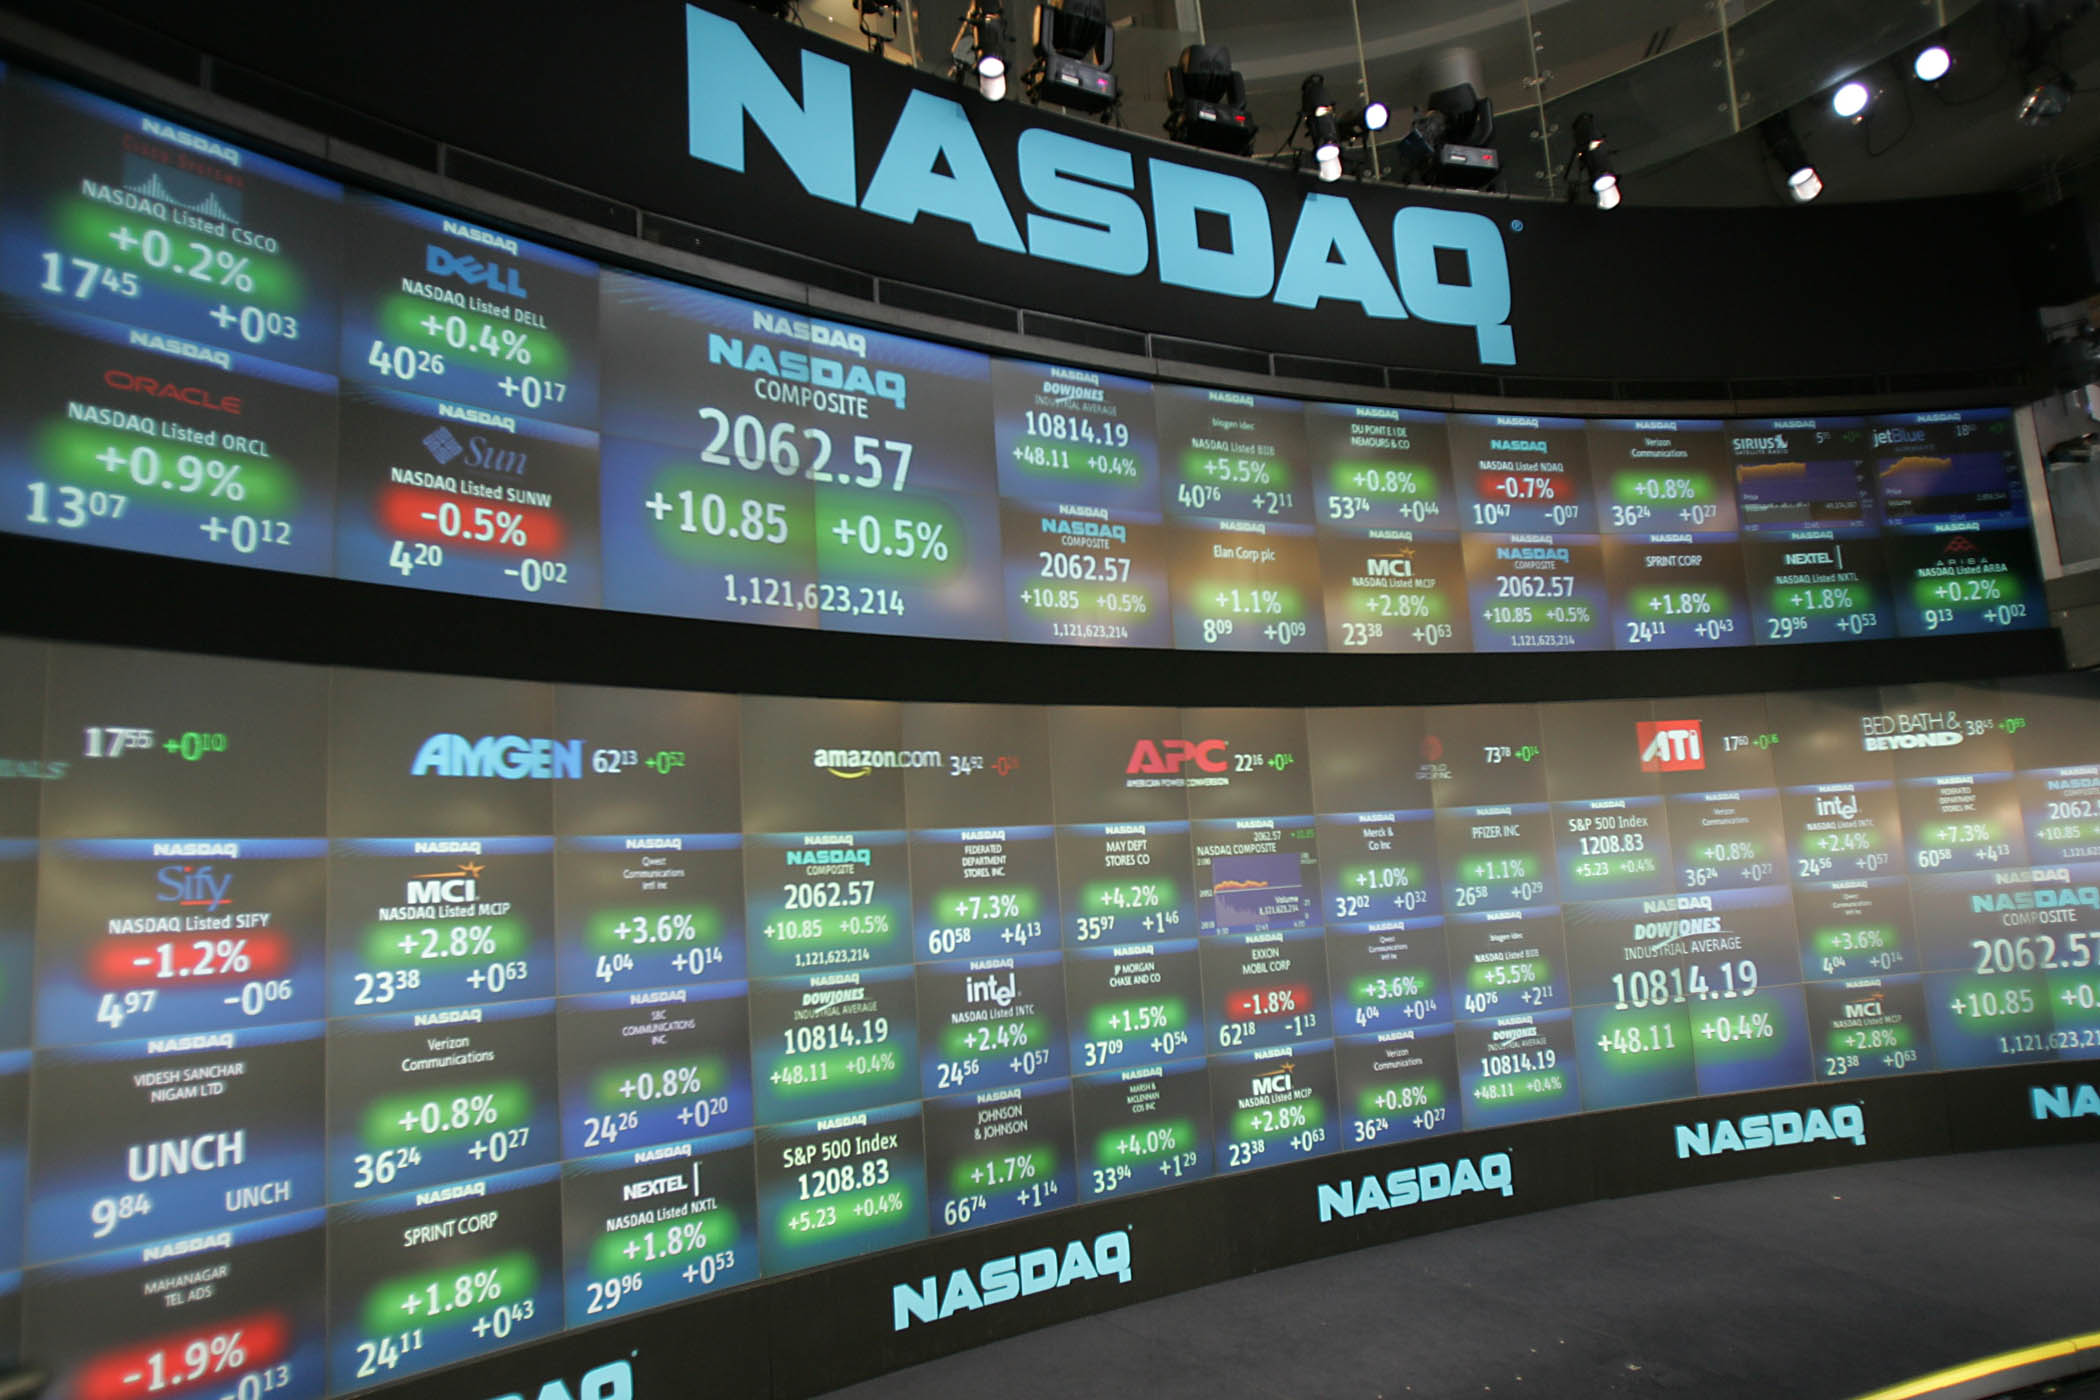 Nasdaq digital assets group to launch cryptocurrency custody service